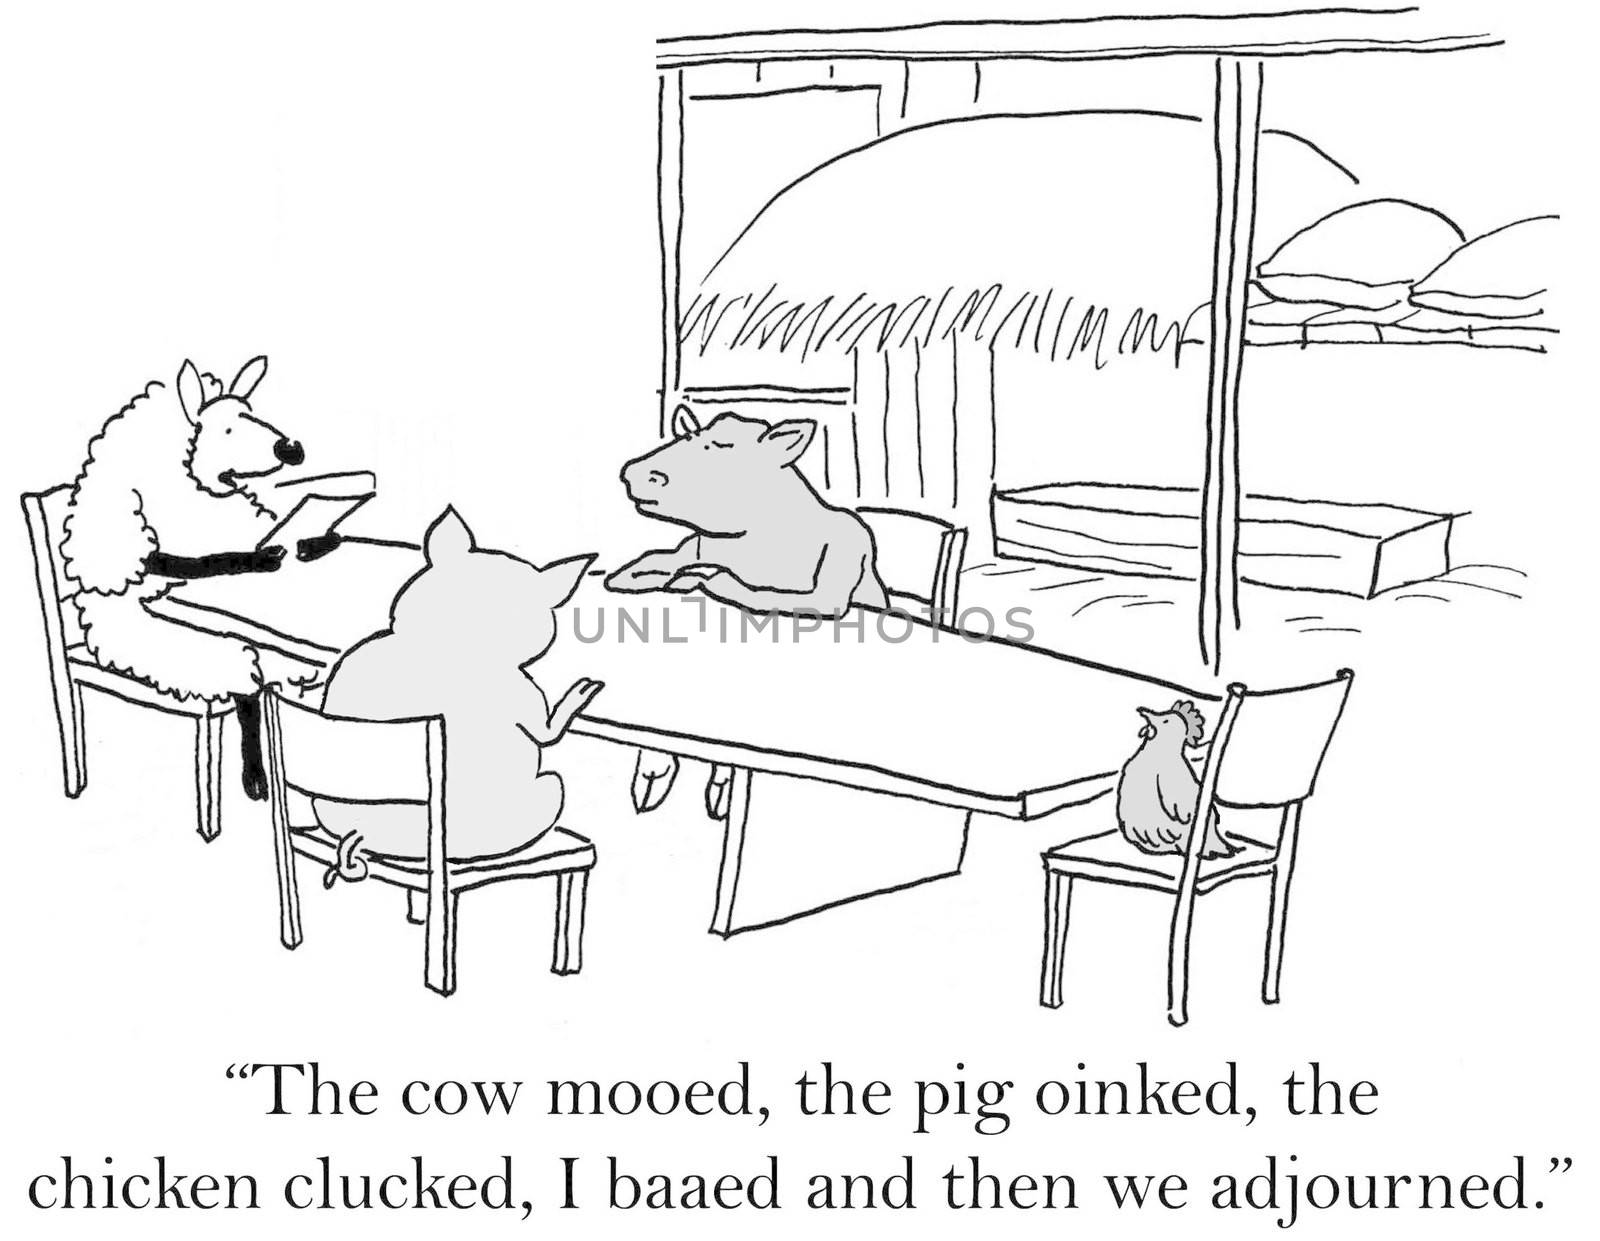 "The cow mooed, the pig oinked, the chicken clucked, I baaed and them we adjourned."